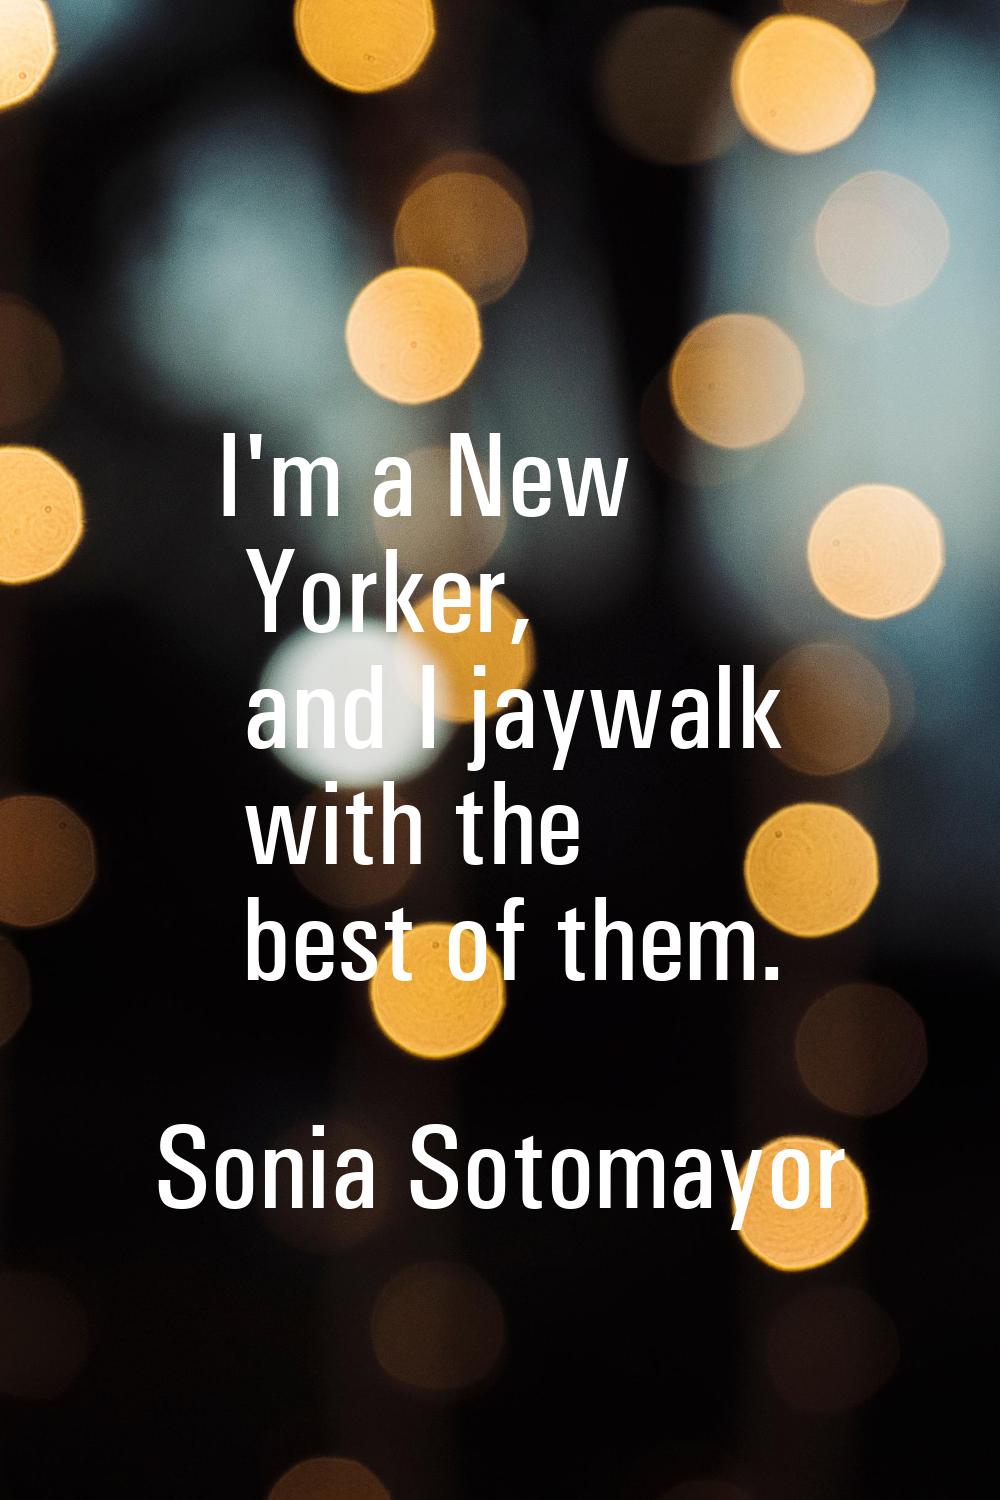 I'm a New Yorker, and I jaywalk with the best of them.